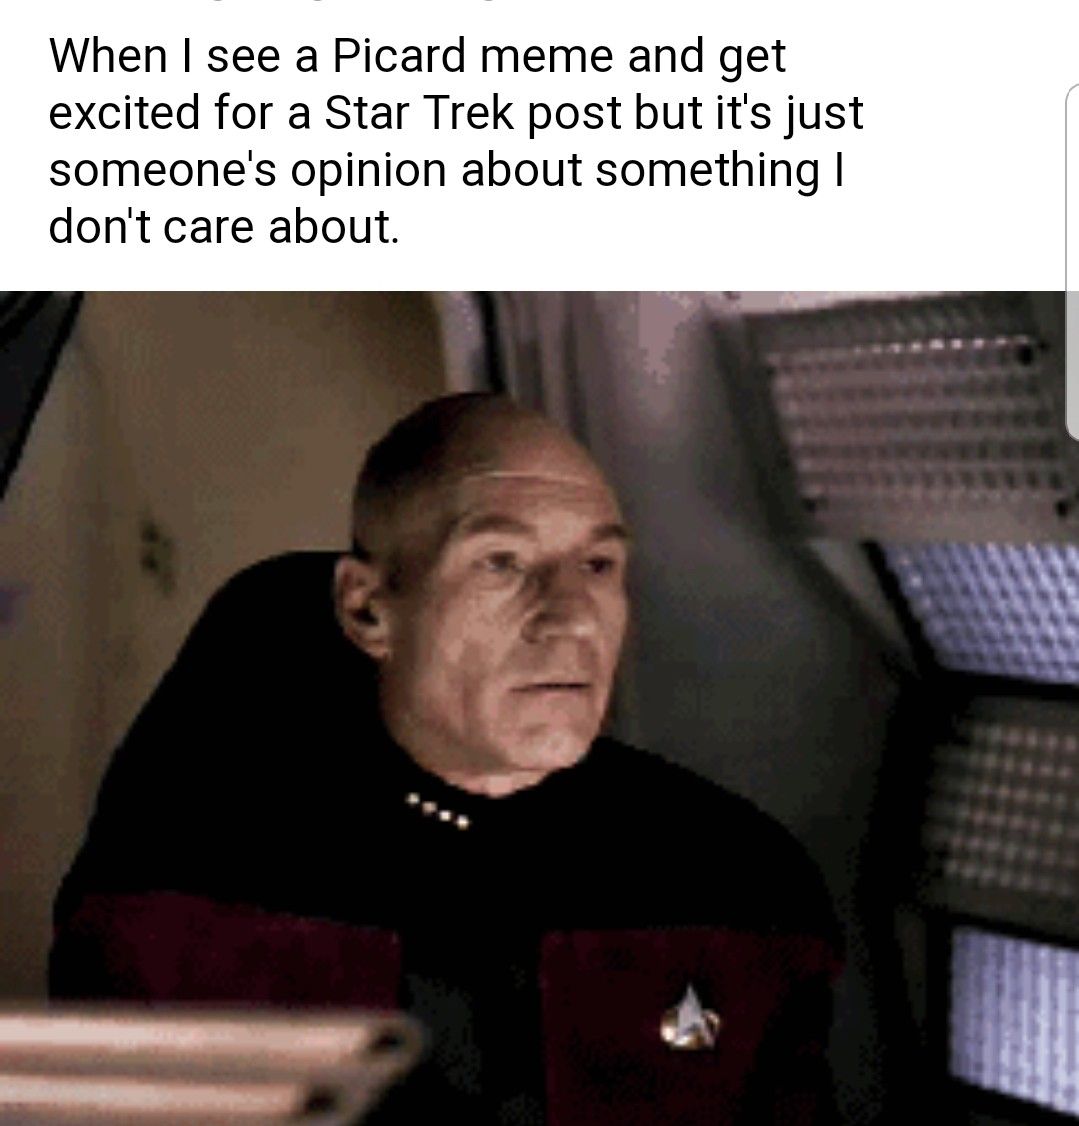 Star Trek 10 Hilarious Picard Memes To Get You Ready For His Solo Series -  